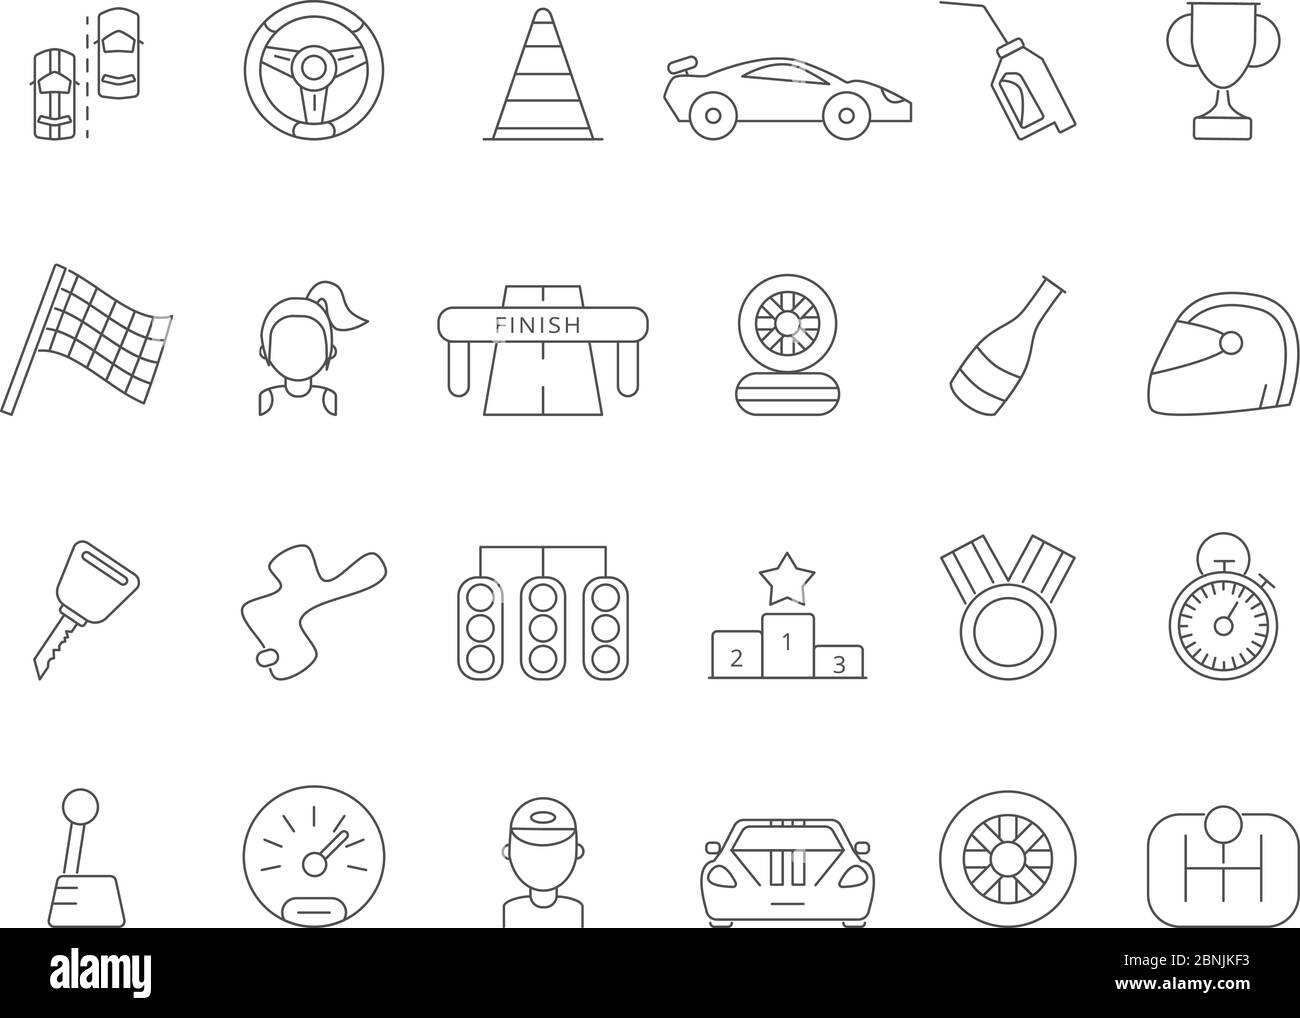 Linear icon set of formula 1 cars Stock Vector